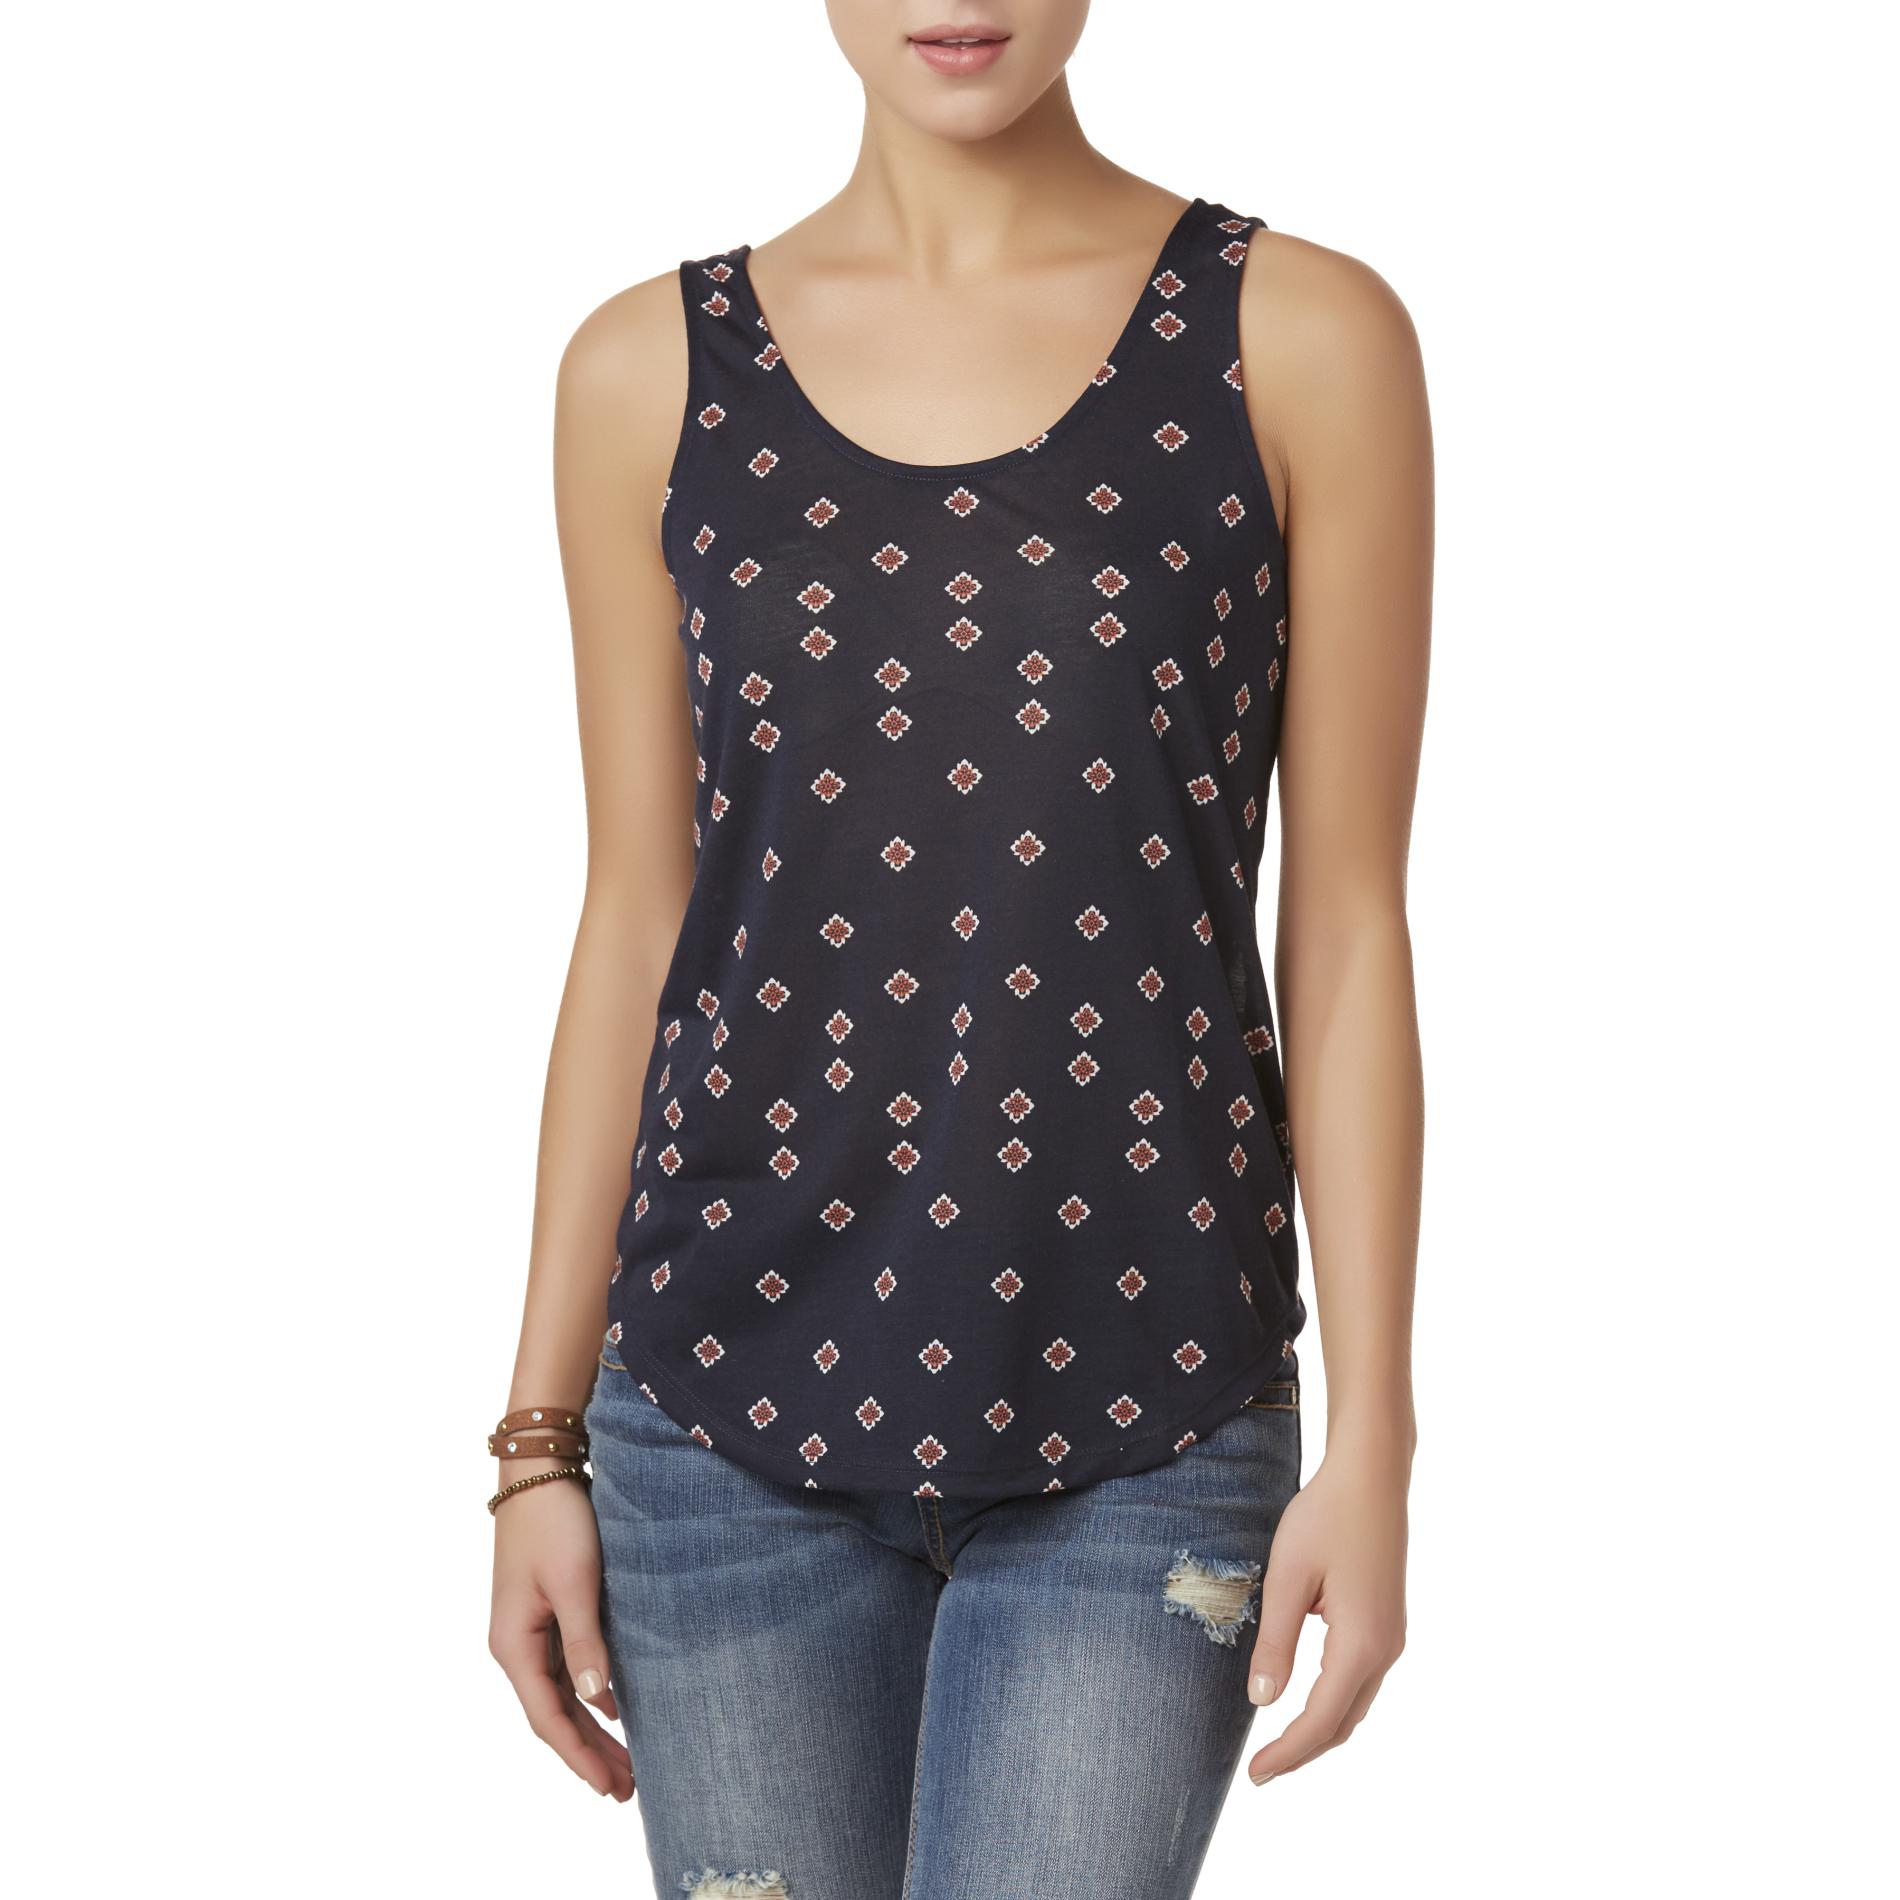 Simply Styled Women's Tank Top - Floral